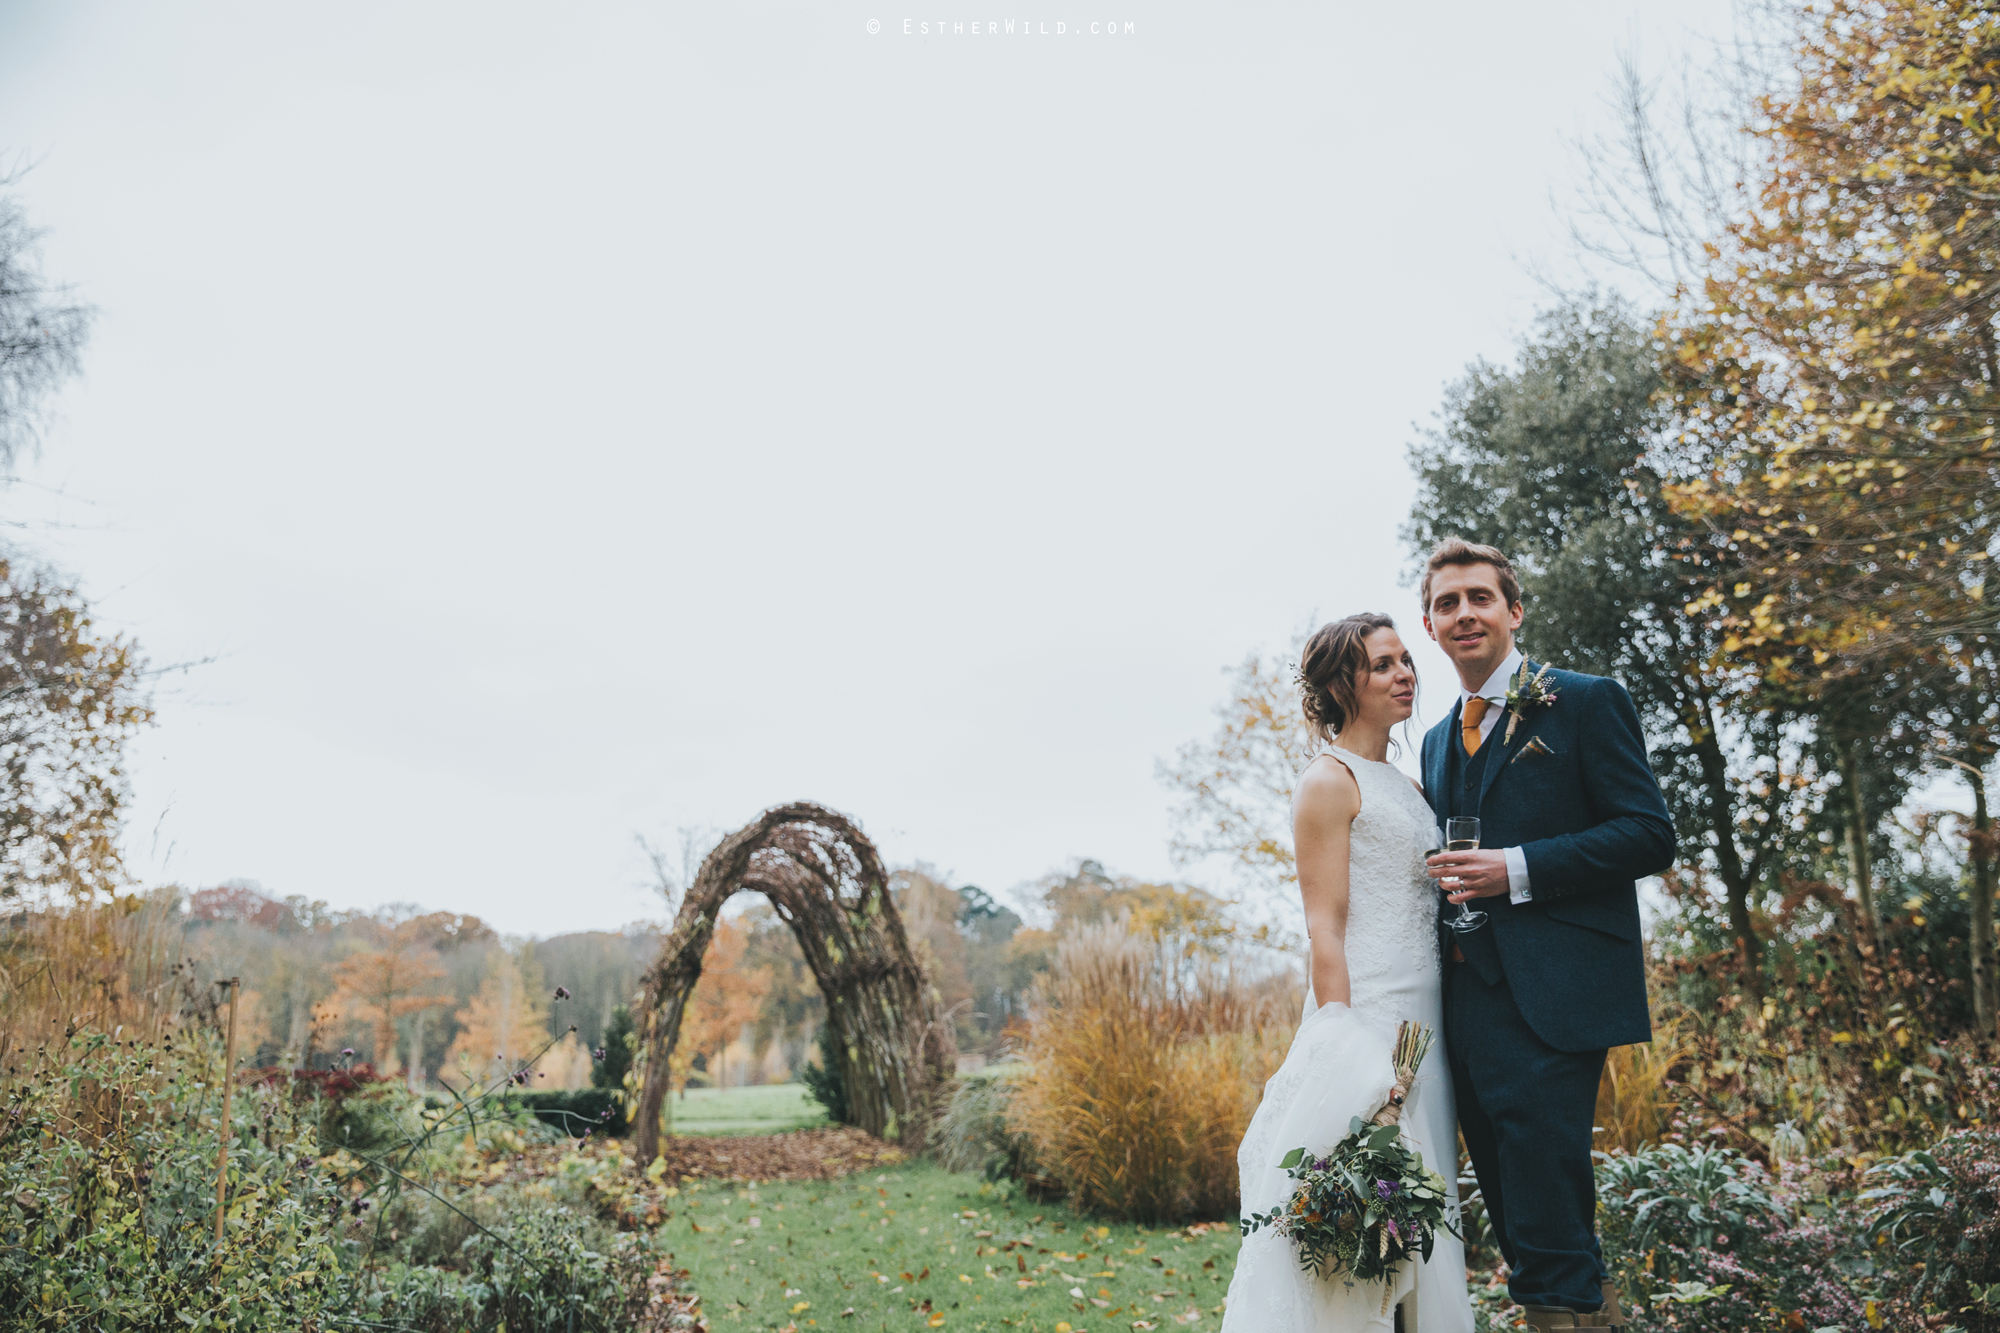 Wedding_Photographer_Chaucer_Barn_Holt_Norfolk_Country_Rustic_Venue_Copyright_Esther_Wild_